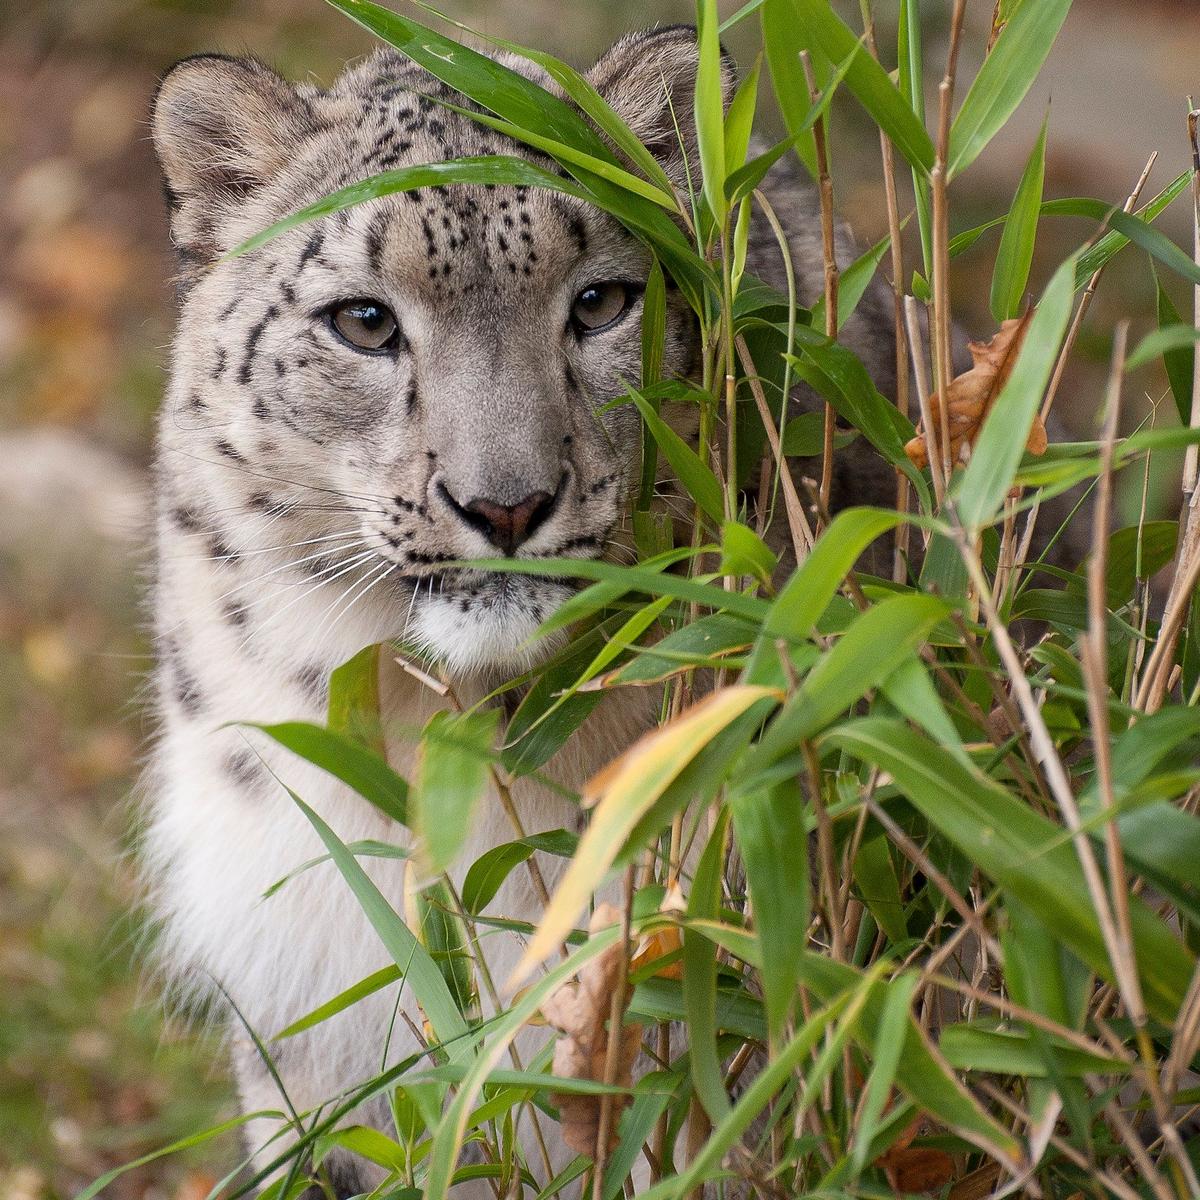 Laila, the female snow leopard in Big Cat Sanctuary (Courtesy of <a href="https://www.facebook.com/TheBigCatSanctuary">The Big Cat Sanctuary</a>)